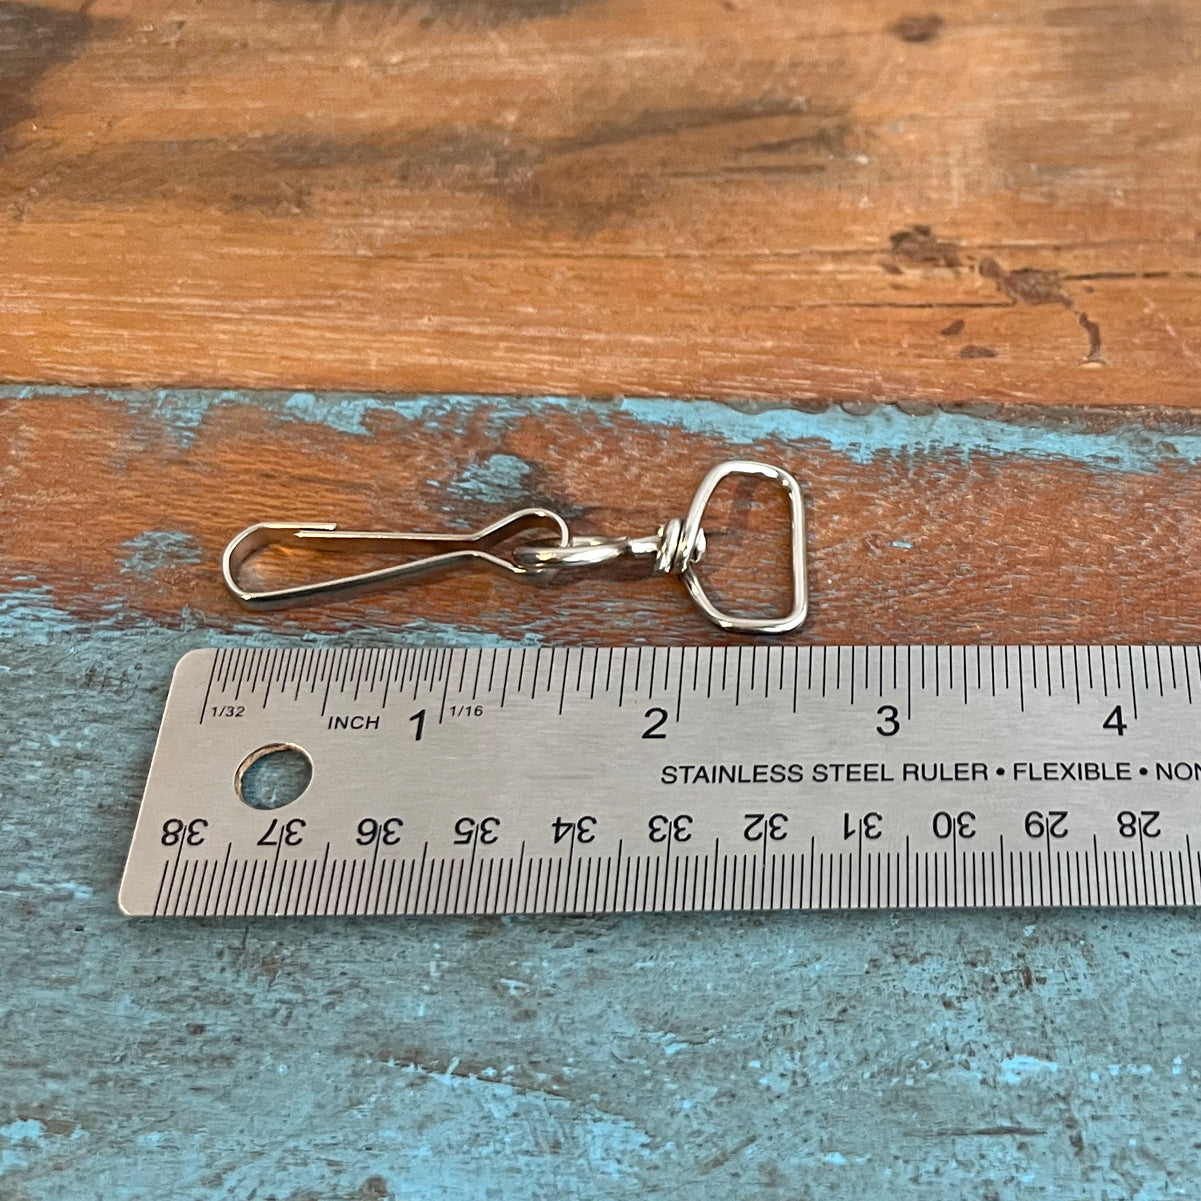 A stainless steel ruler next to a Premium Swivel J Clip Clasp with Wide, Smooth Rounded 3/4 Inch D Ring - DIY Lanyard and Craft Accessories (6905-M-289), placed on a wooden surface. The ruler shows measurements in both inches and centimeters, perfect for precision tasks involving DIY lanyards or swivel J hook clasps.